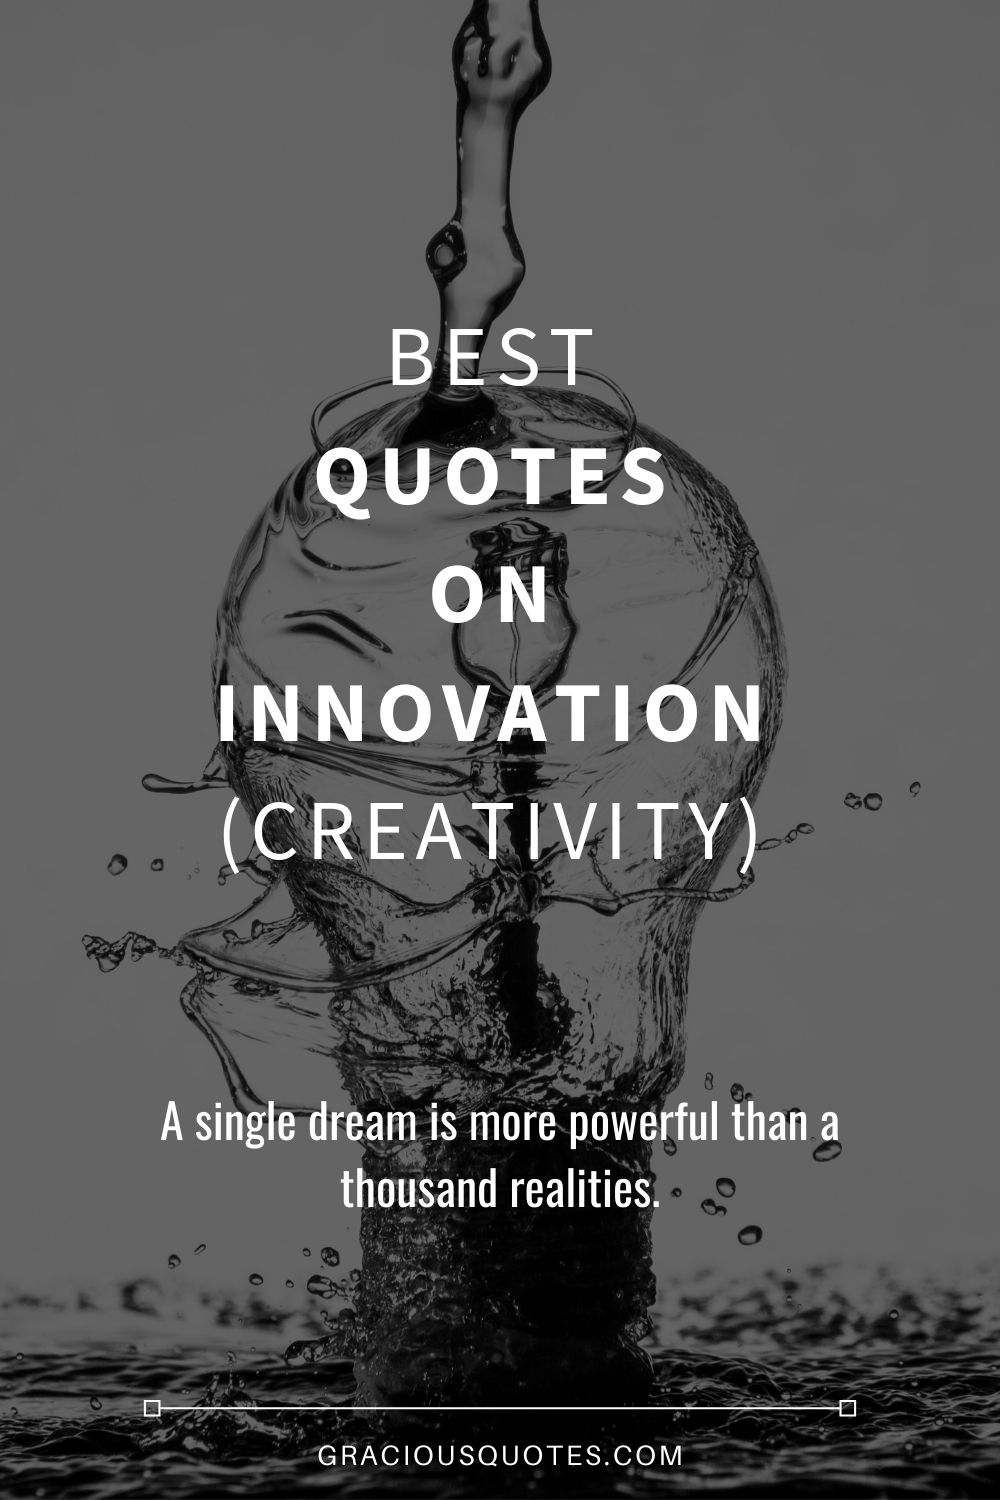 Best Quotes on Innovation (CREATIVITY) - Gracious Quotes